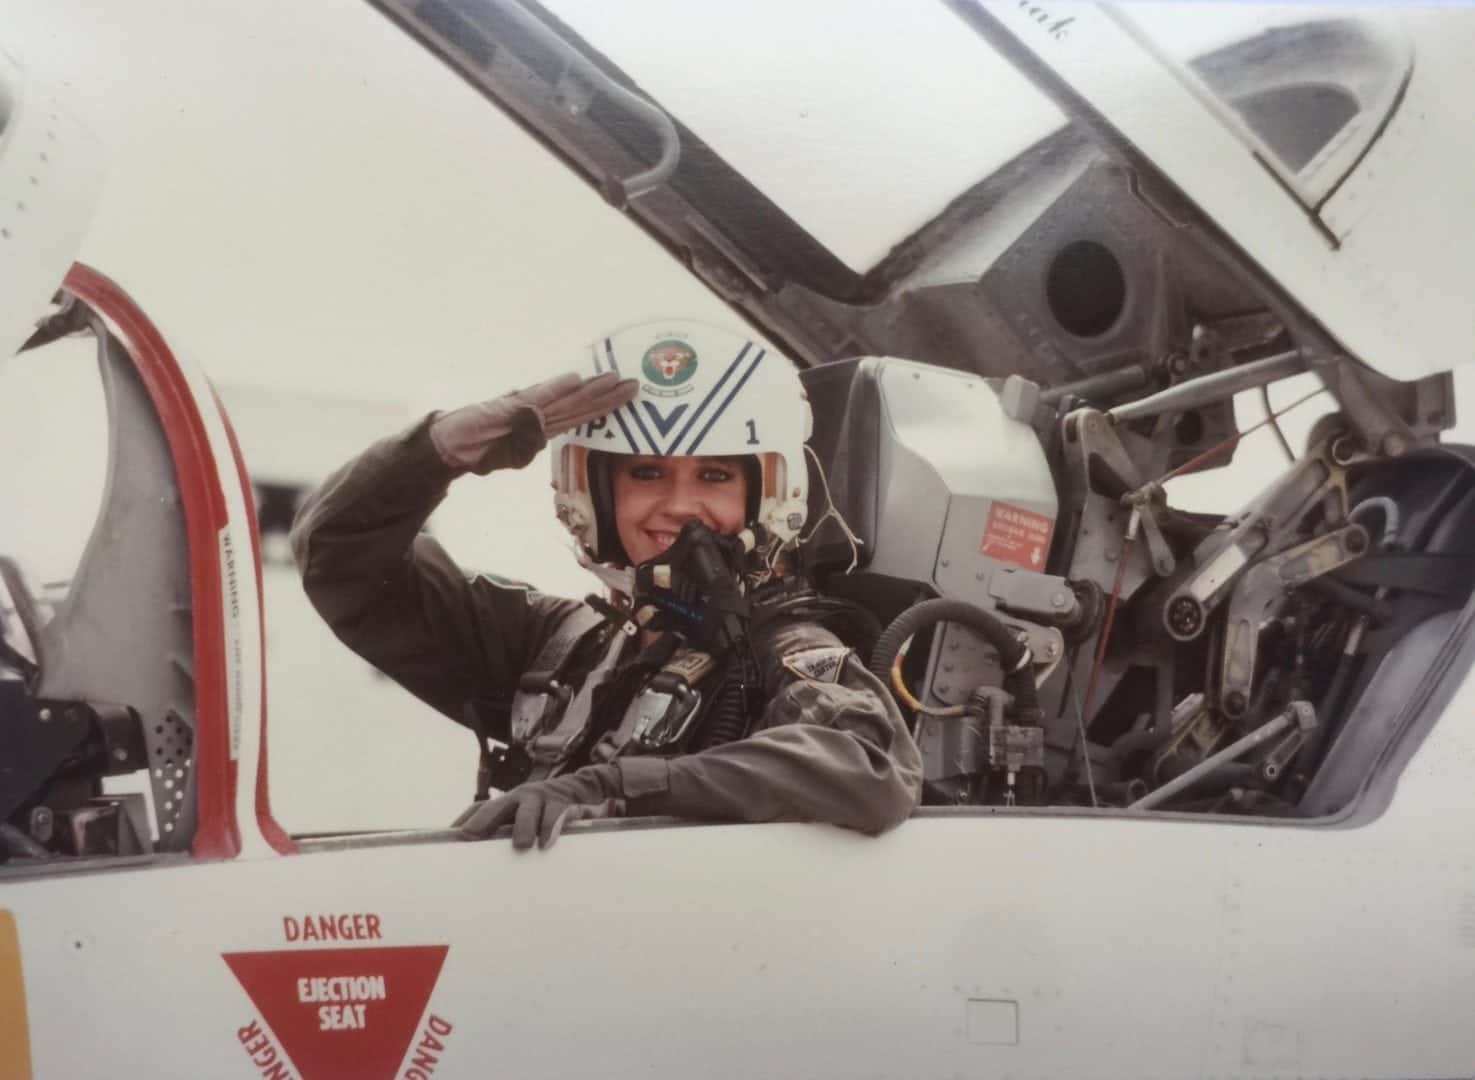 BRENDA COFFEE, AGE 24, AS A JOURNALIST, FLYING IN AN AIR FORCE FIGHTER JET. ©1010ParkPlace, 2018.